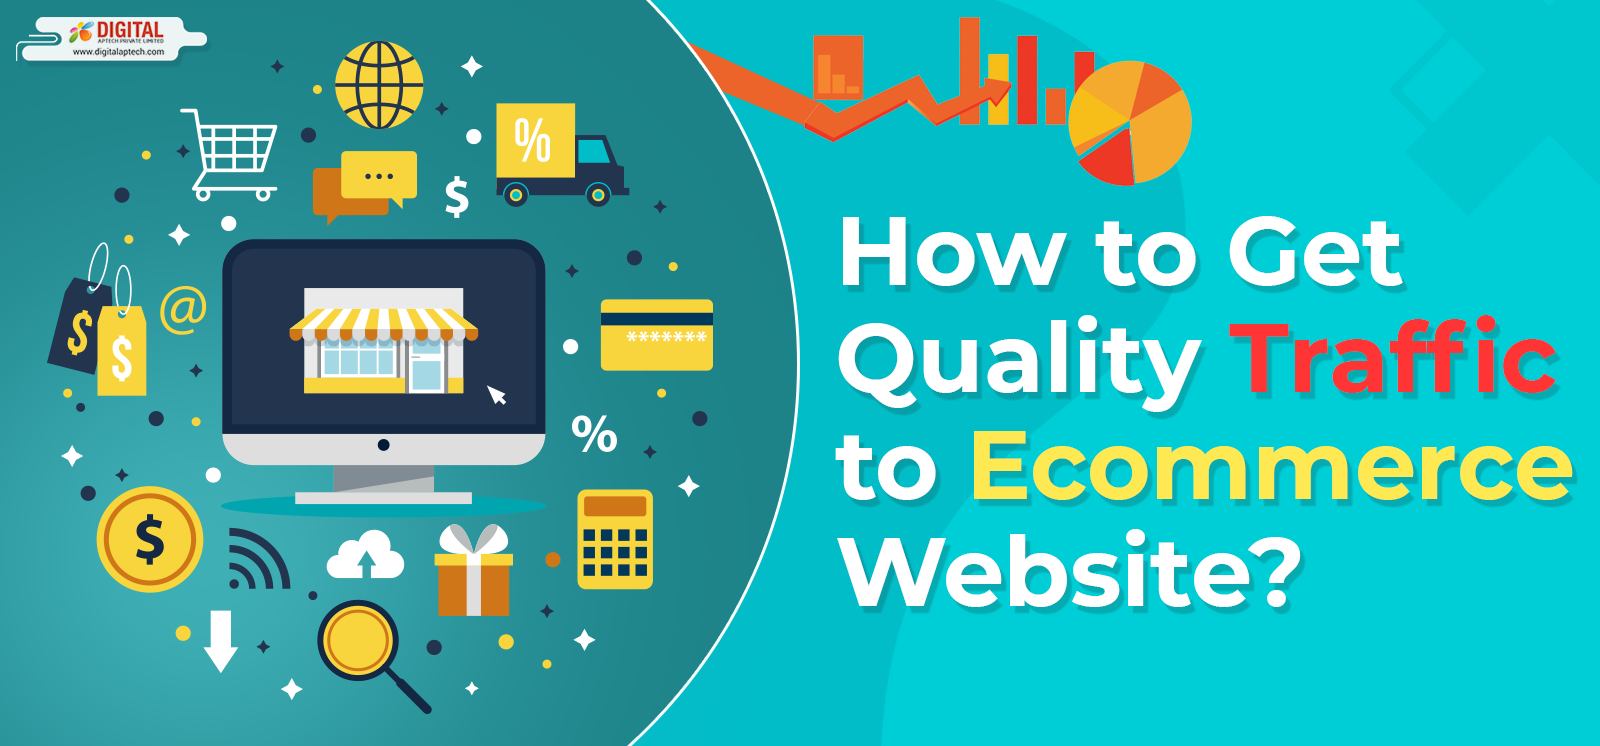 How to Get Quality Traffic to Ecommerce Website?